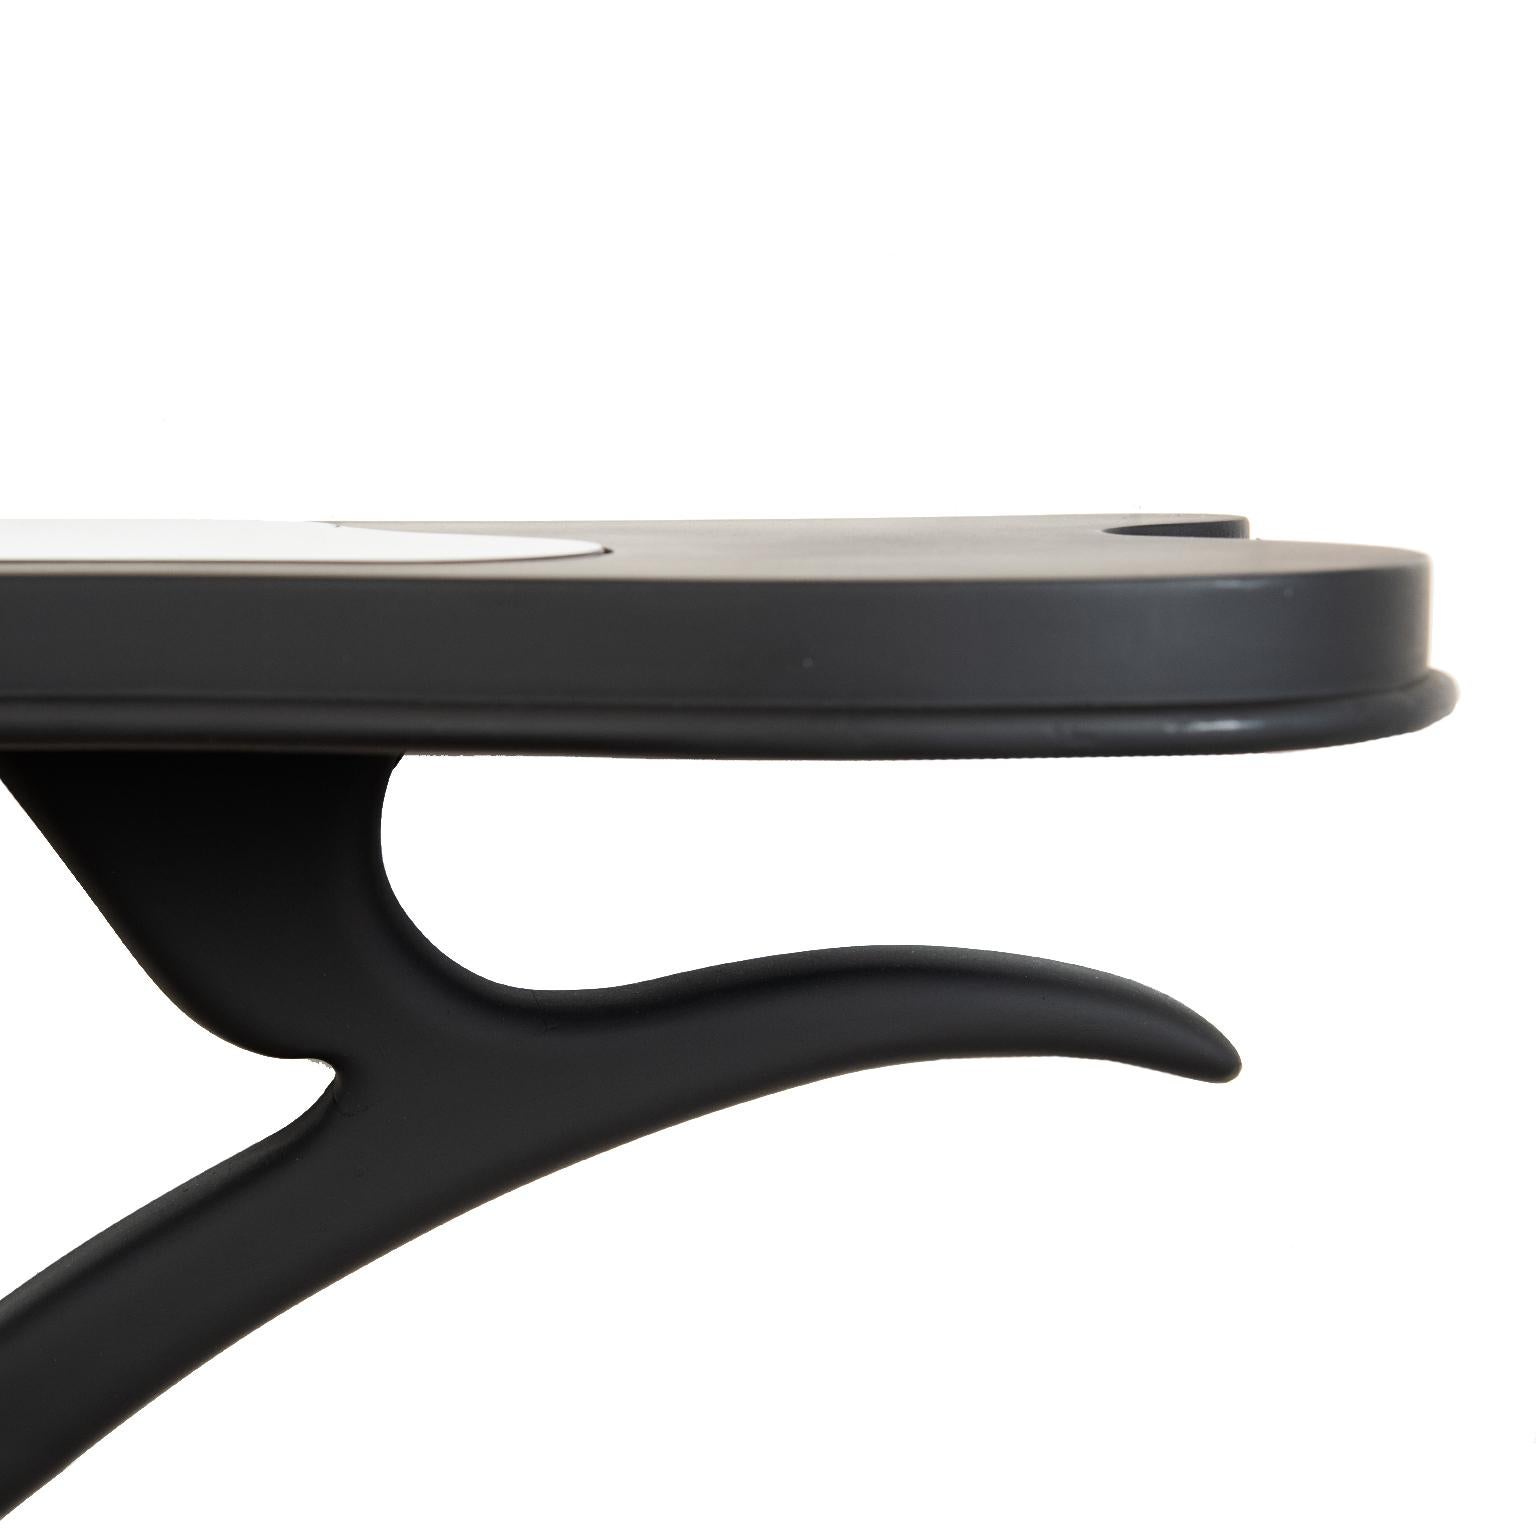 This chic and curvaceous black painted decorator table with a black glass insert is designed to be mounted to the wall with its demilune design.